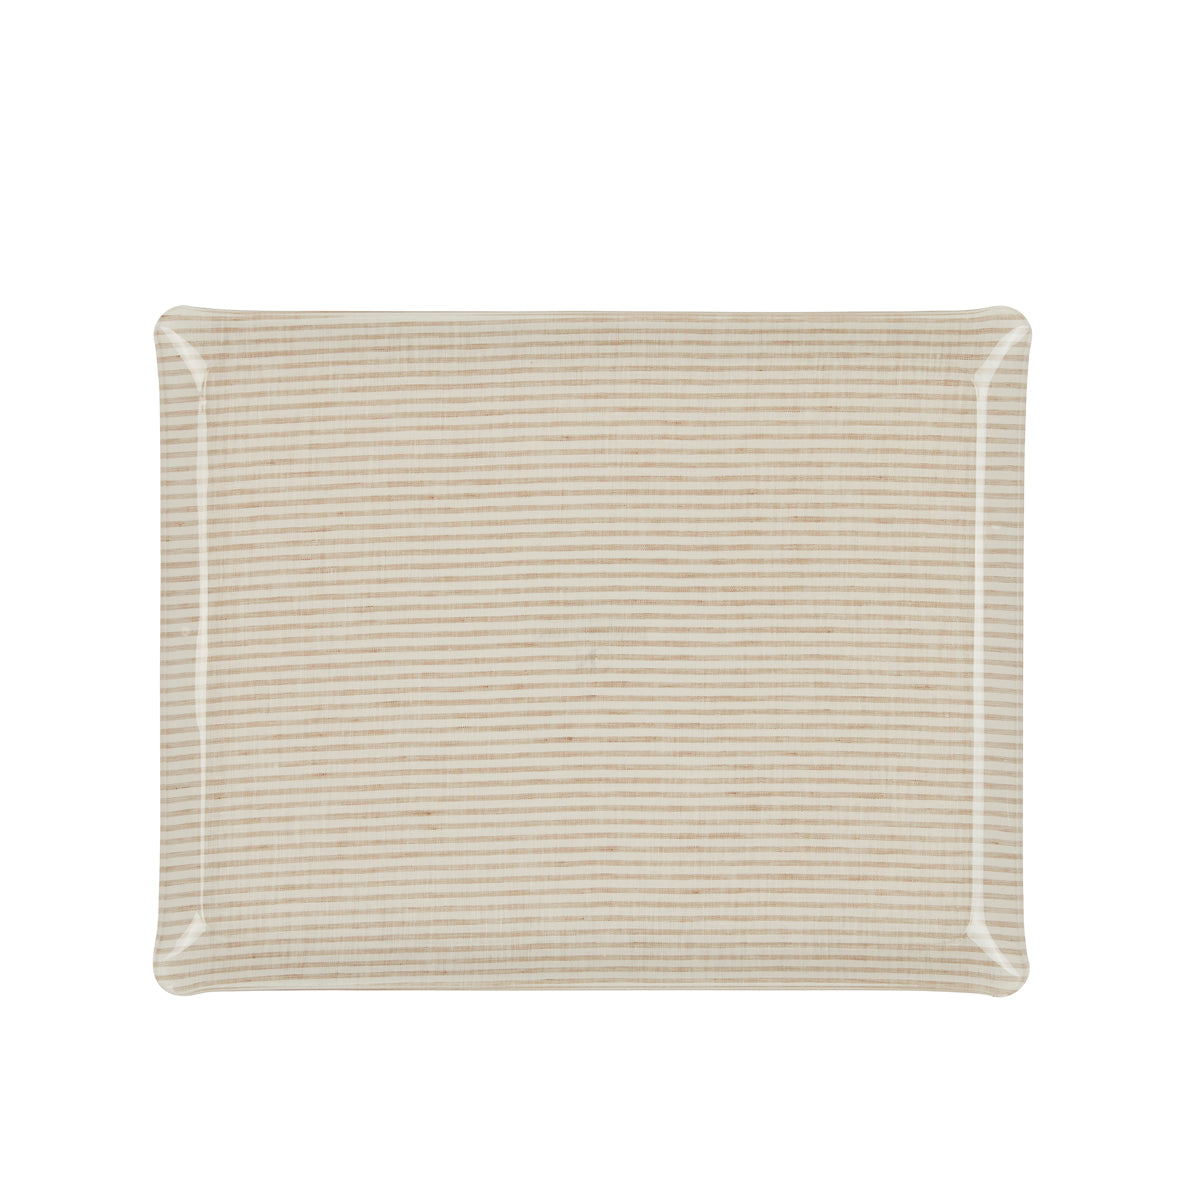 Nina Campbell Fabric Tray Large - Stripe Beige and White